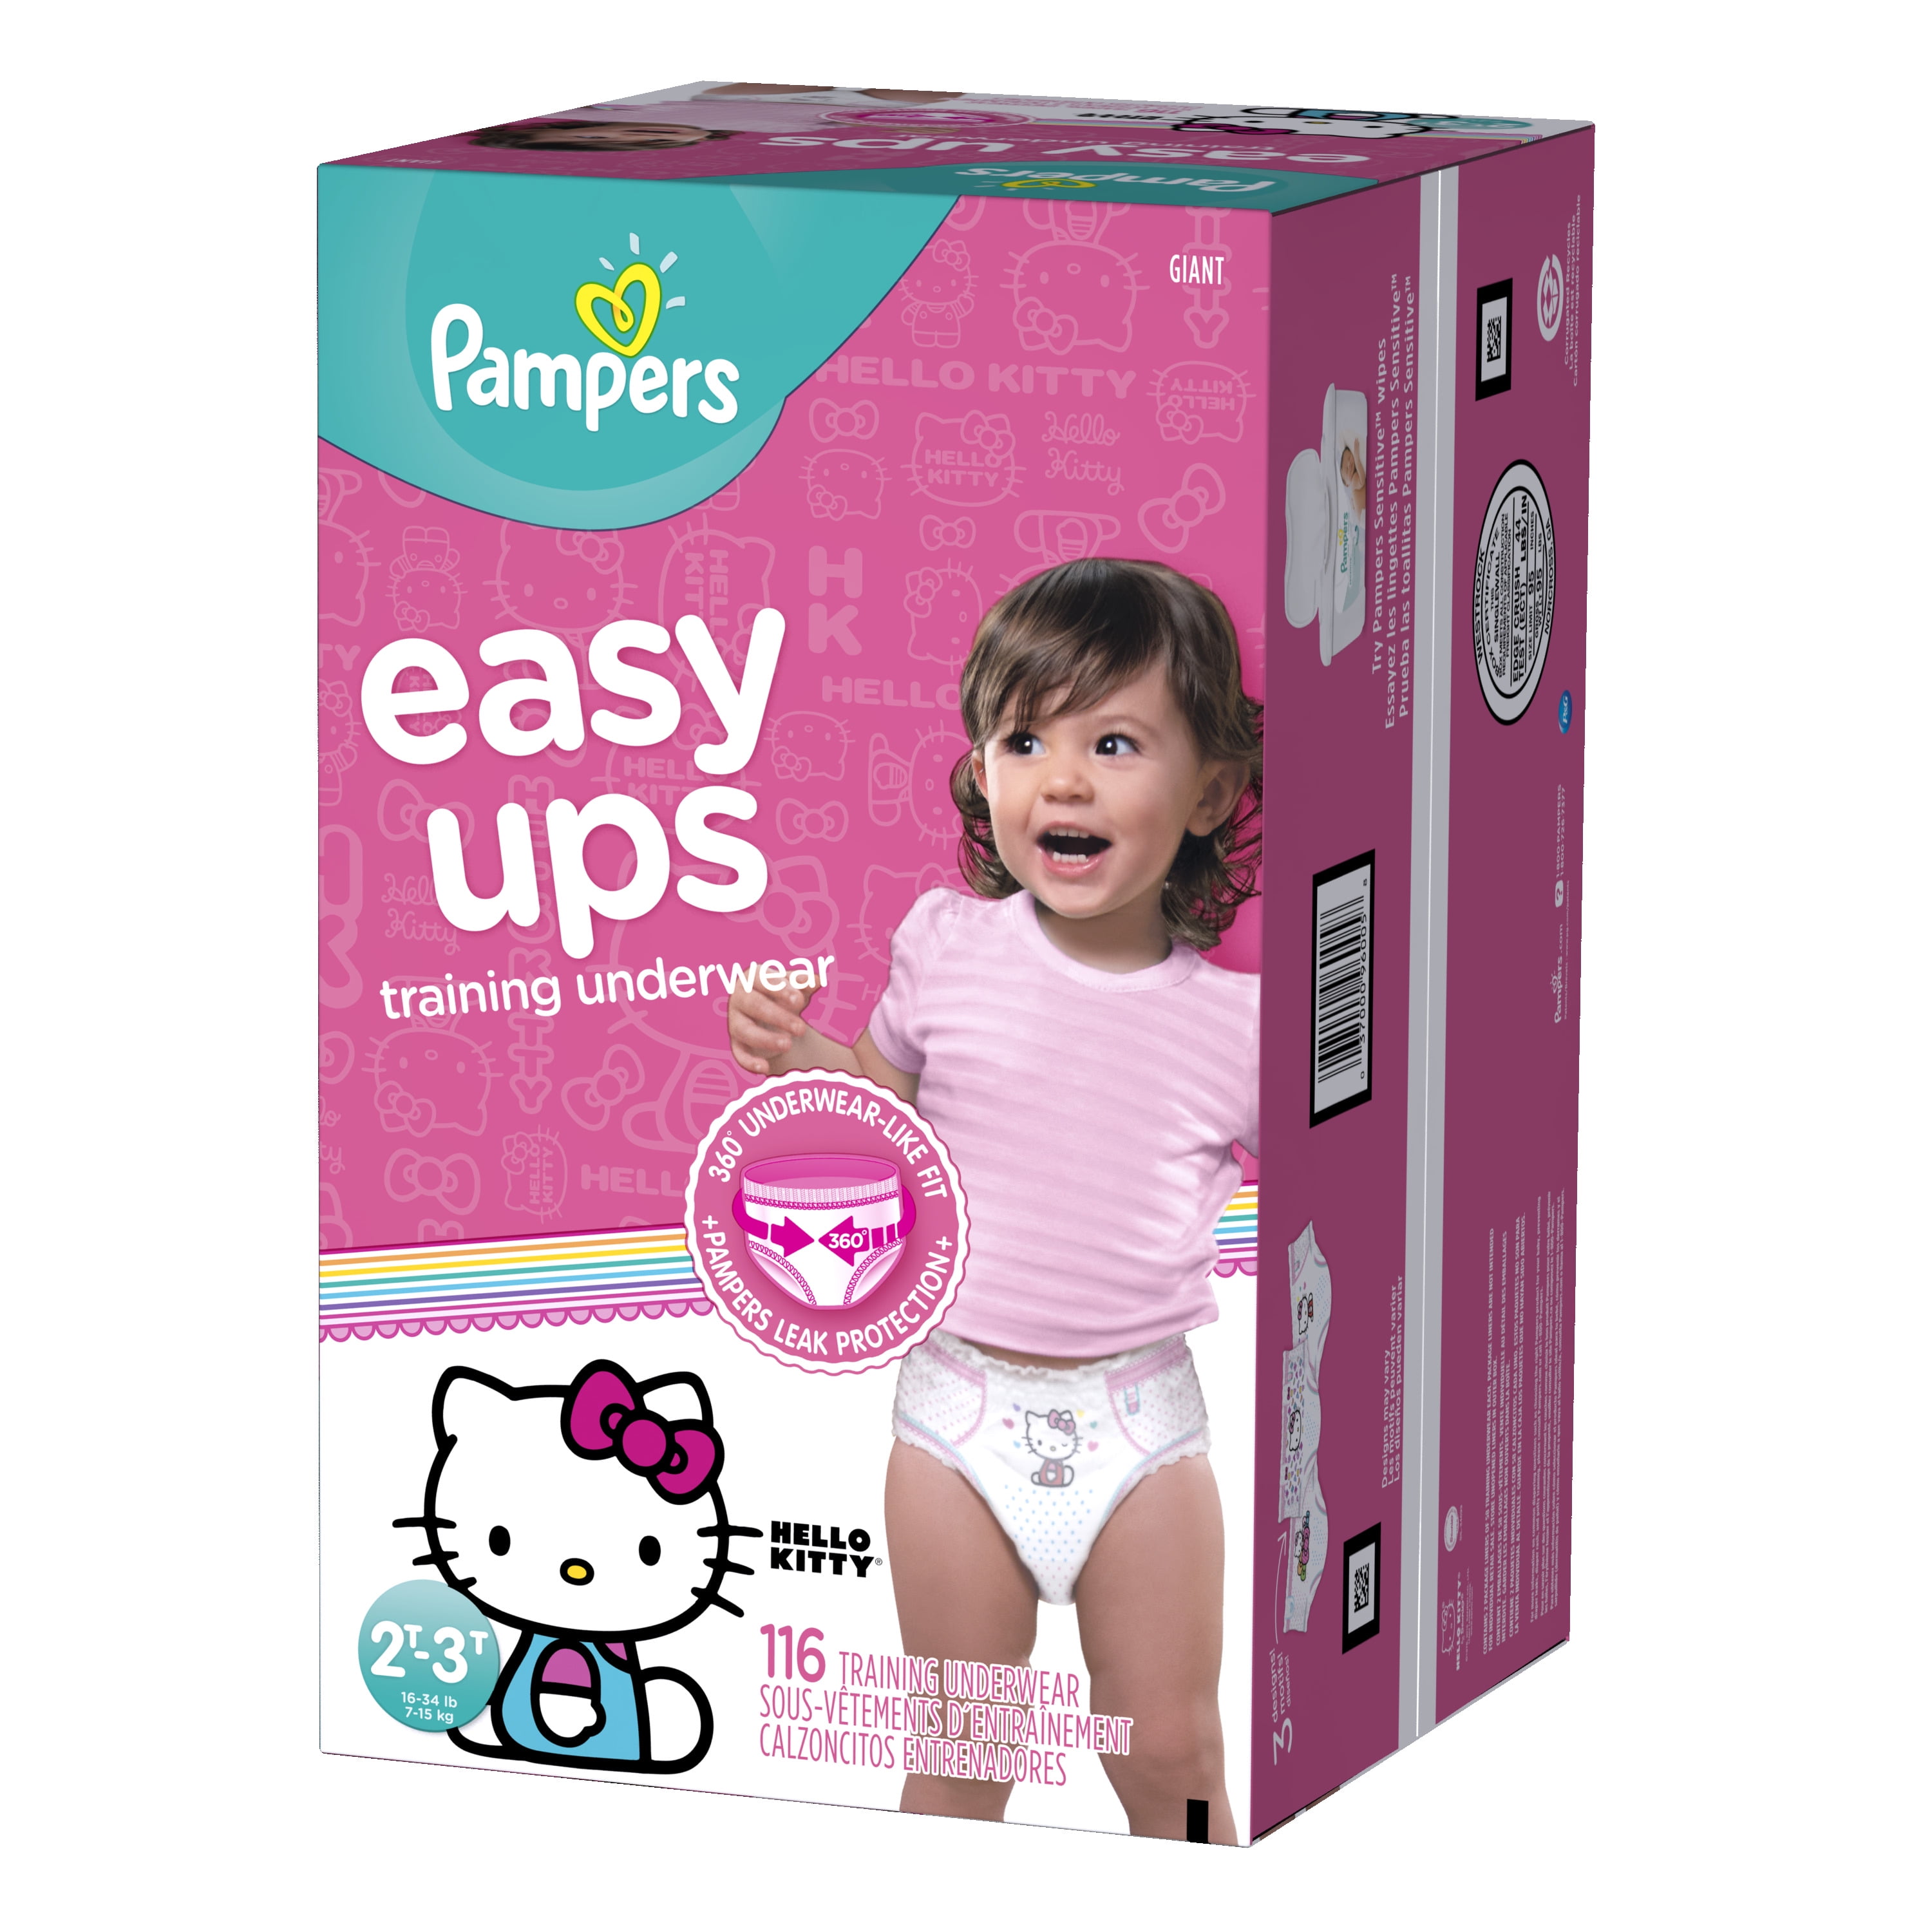 Pampers Easy Ups Girls Training Pants, Size 2T-3T, 116 Pants